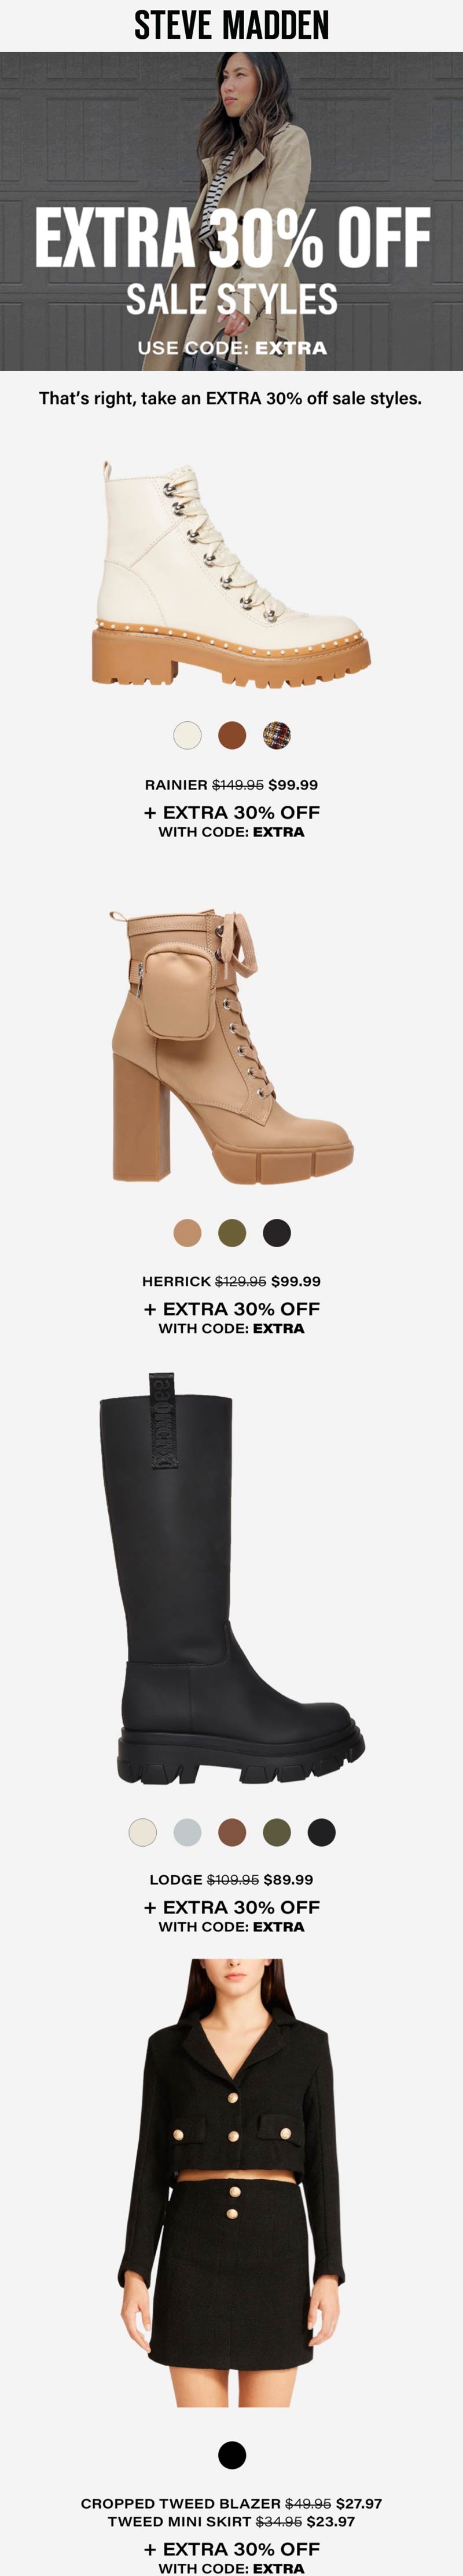 Steve Madden coupons & promo code for [August 2022]